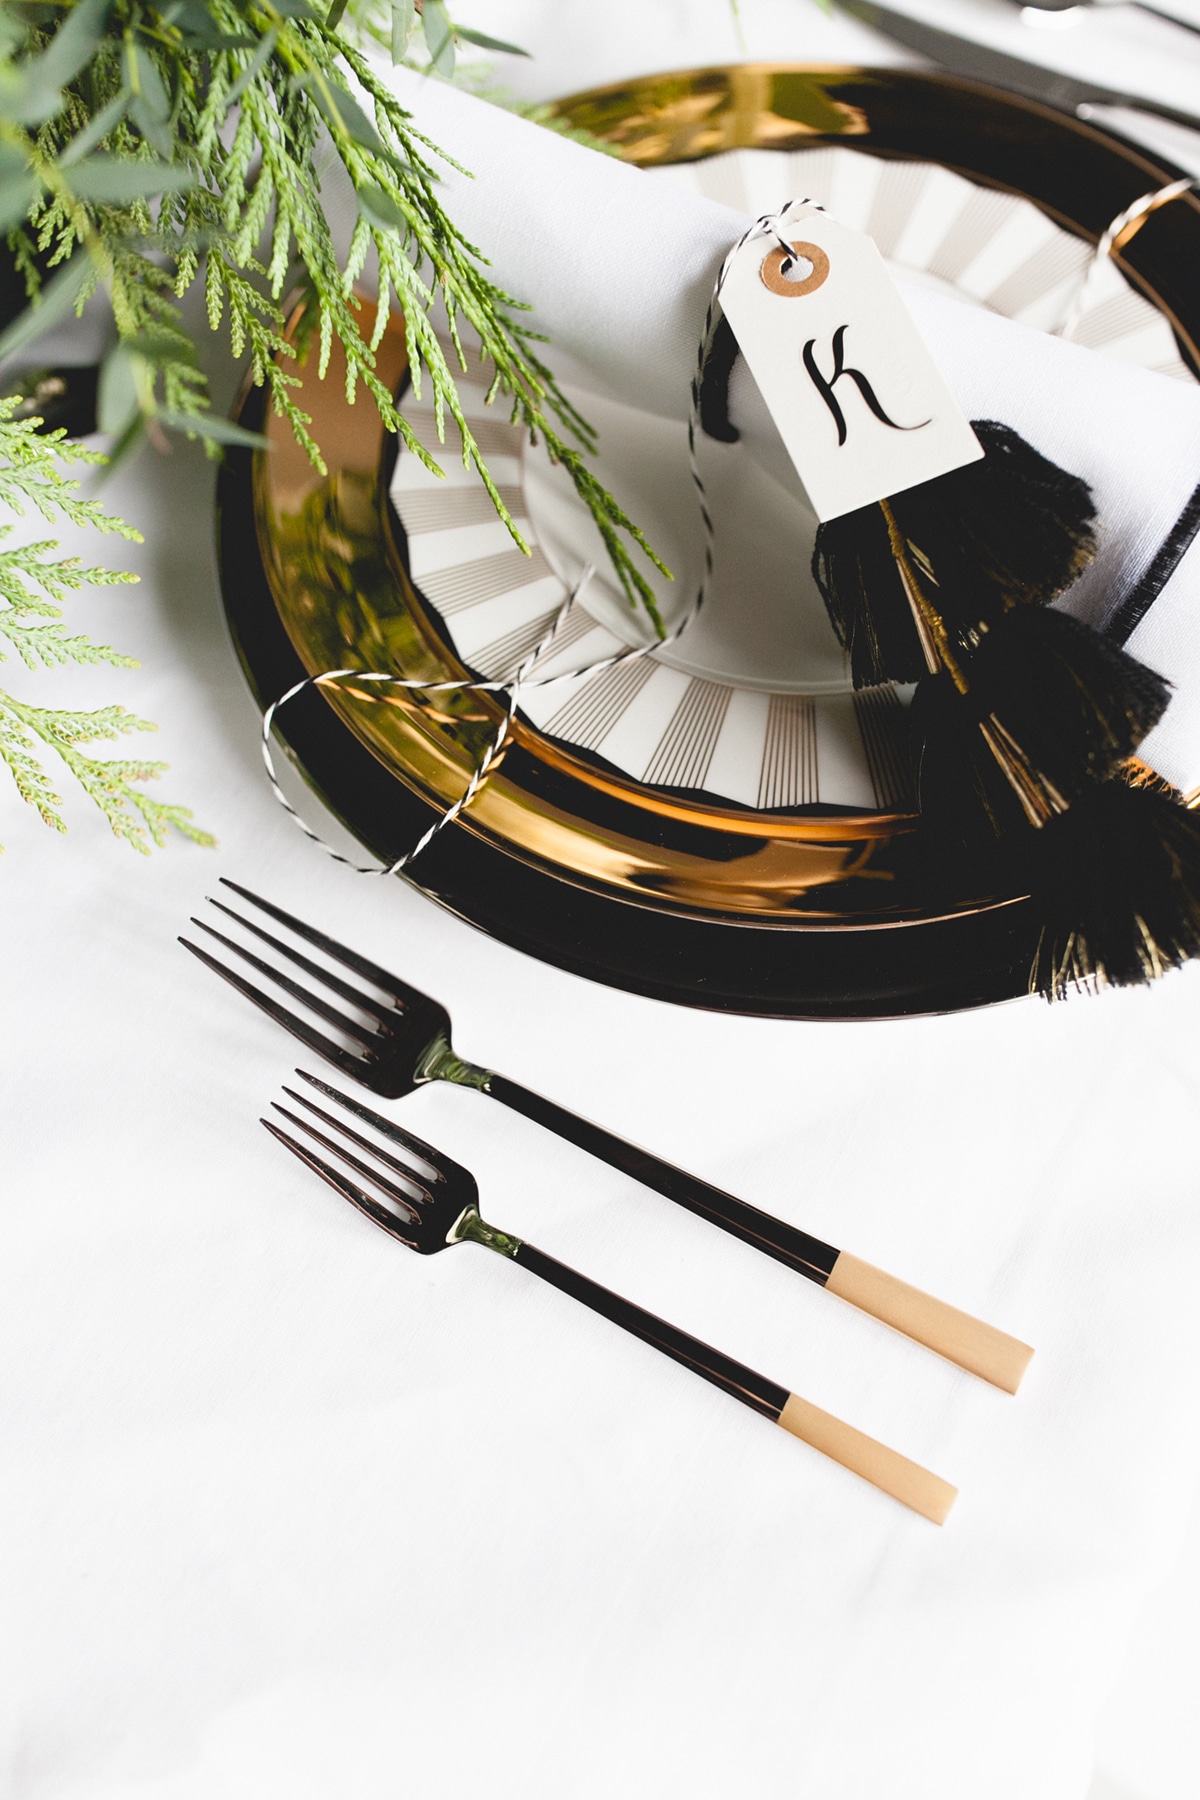 a black tie holiday tabletop setting with gold details | coco kelley